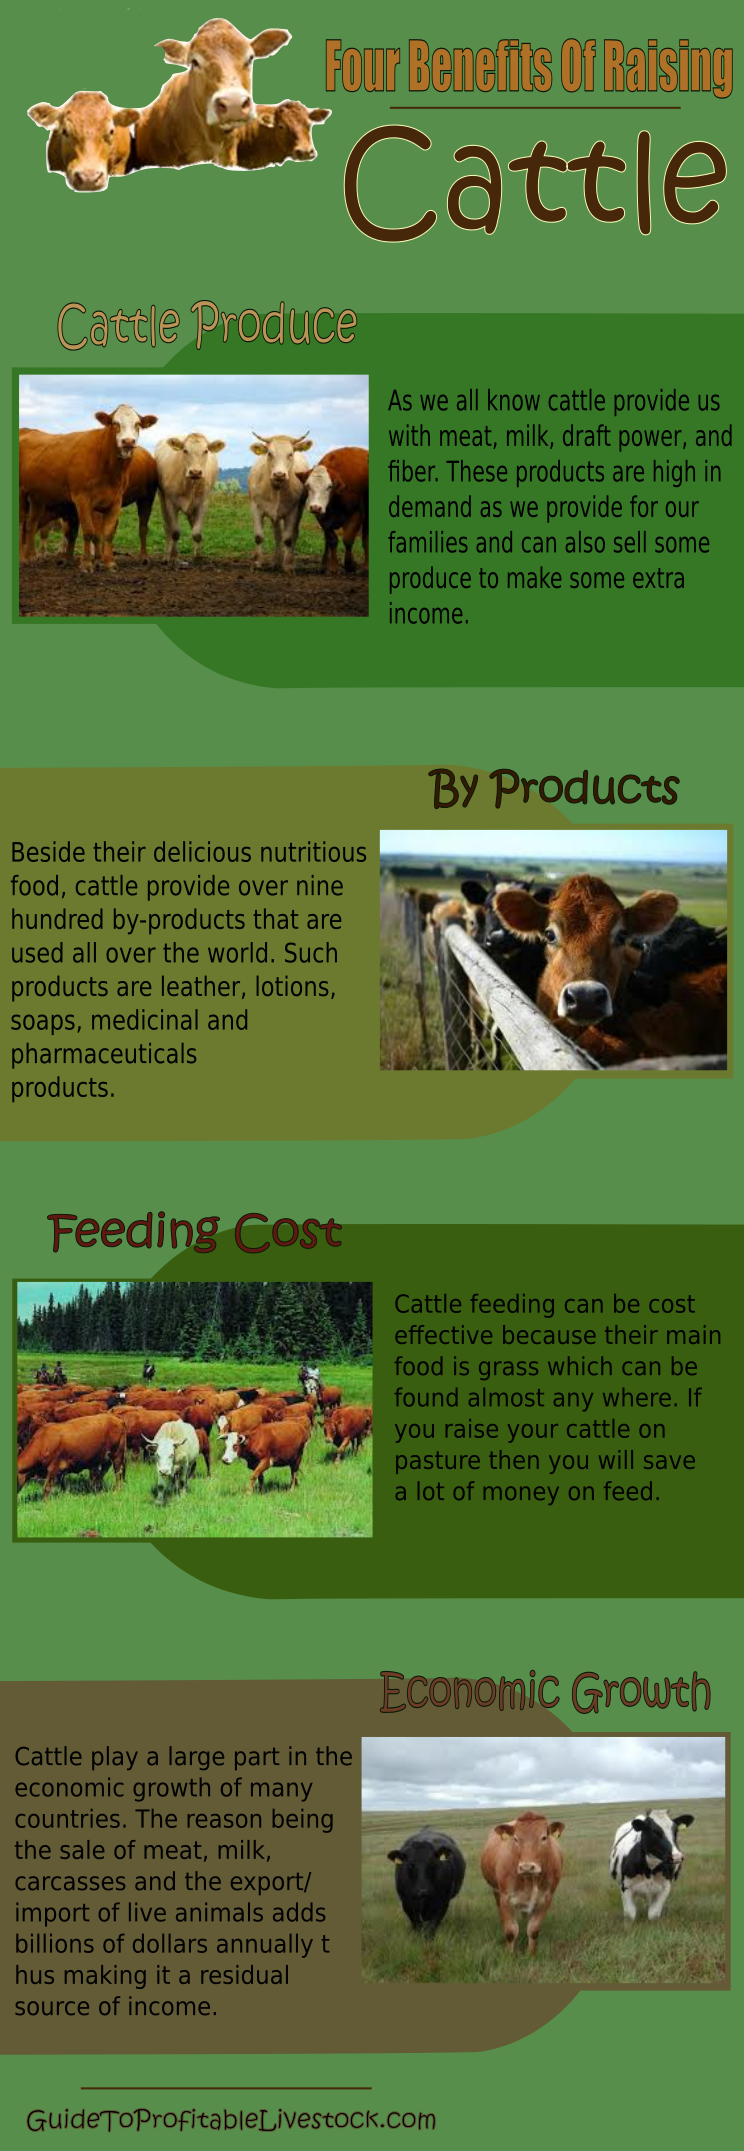 Four Benefits Of Raising Cattle